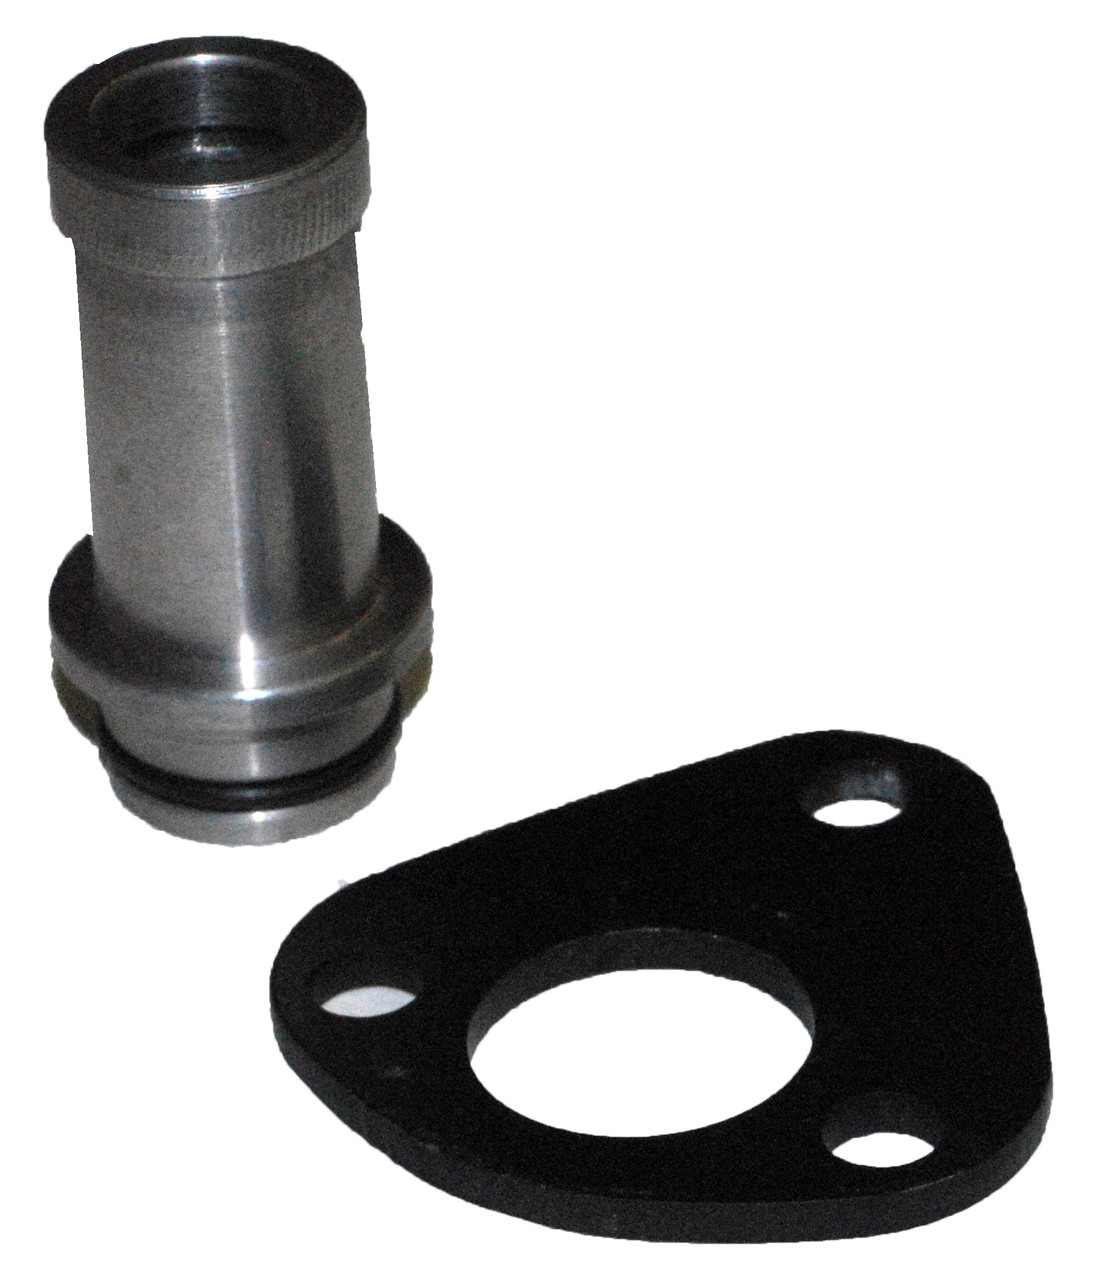 Power Steering 6.0 Tank Adapter Kit - 03-07 Ford Using Commonrail Cummins  Where Pump Has A Snap Ring Style Backing Plate